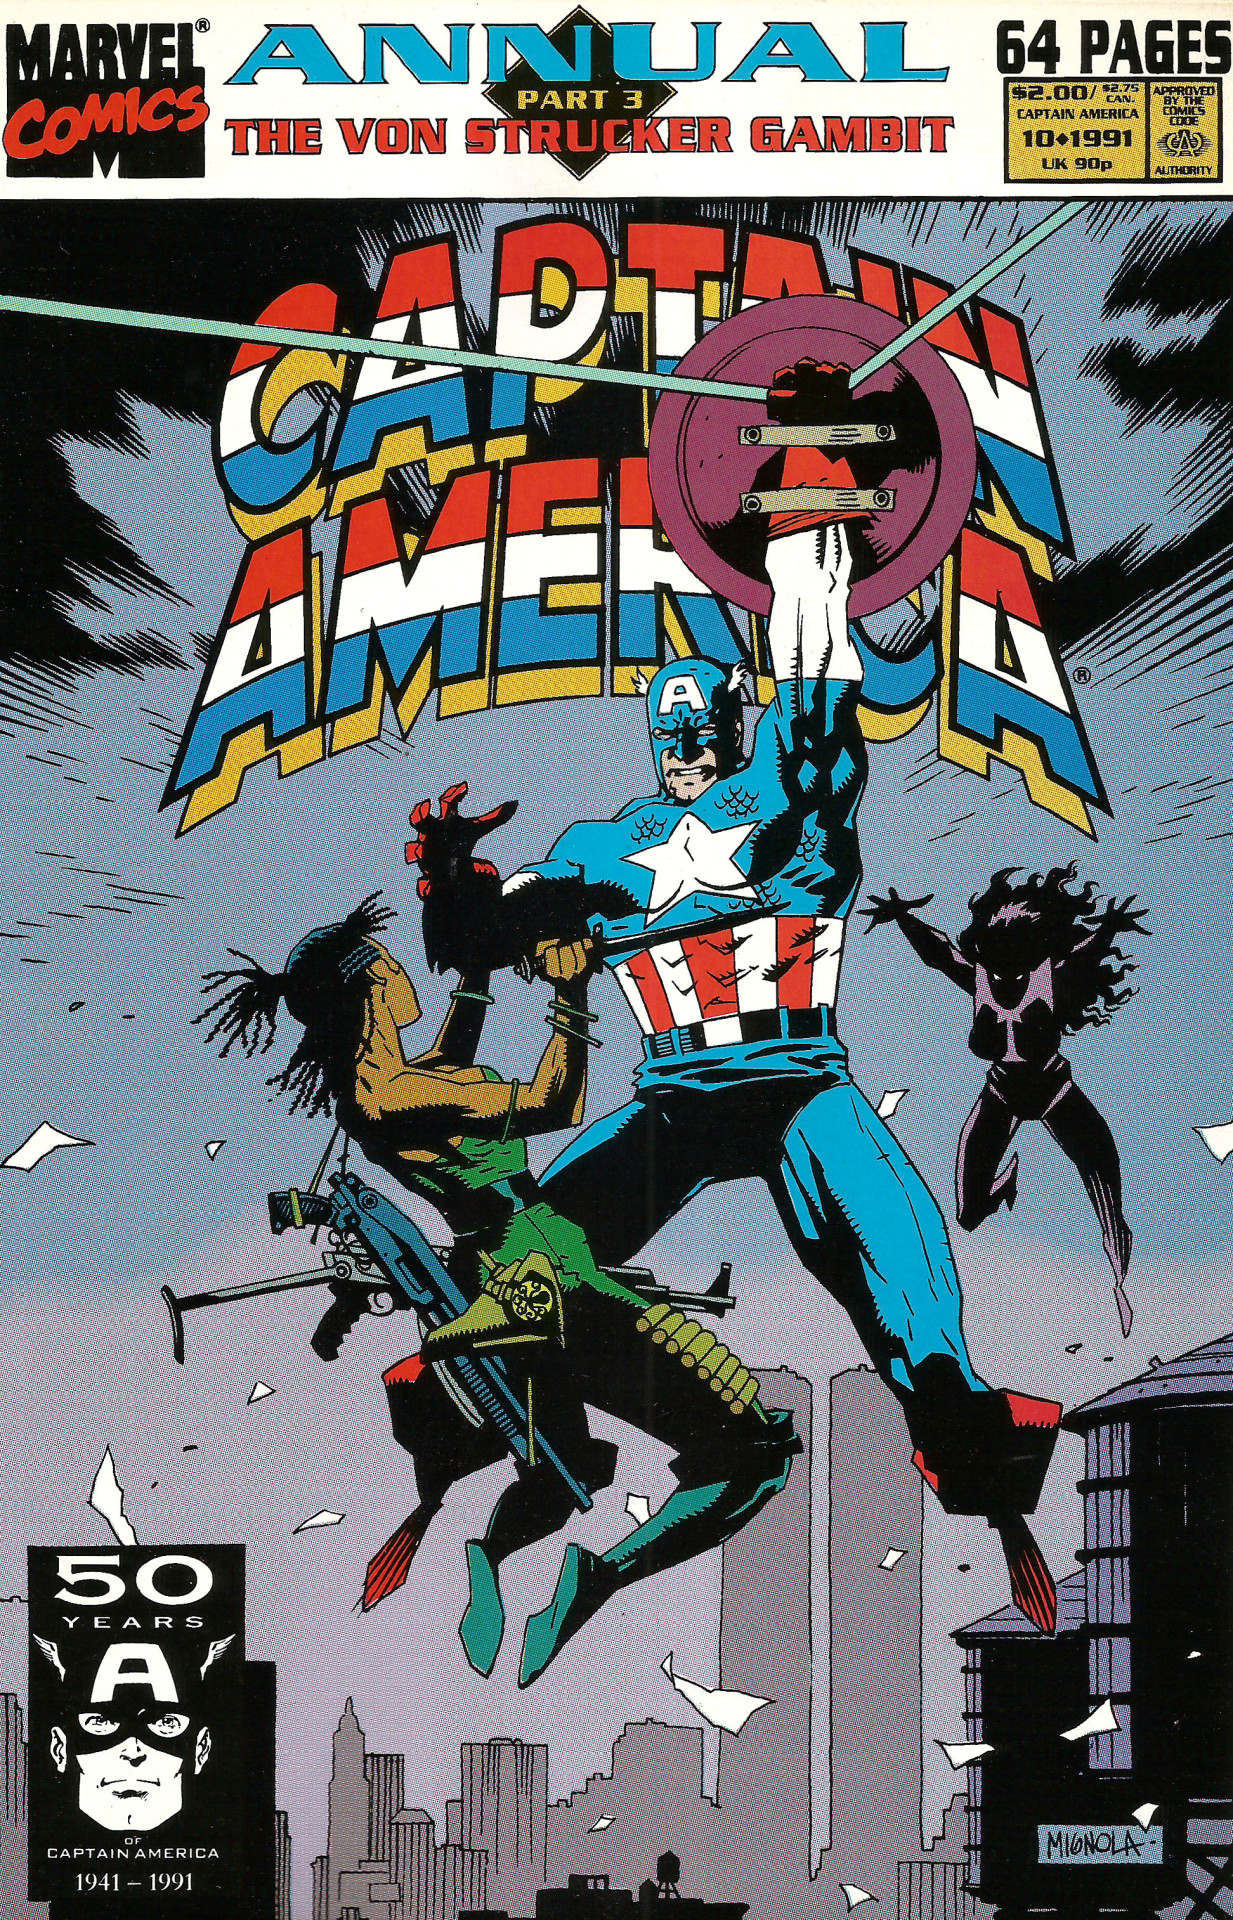 Captain America Annual No. 10 (Marvel Comics, 1991). Cover art by Mike Mignola.From